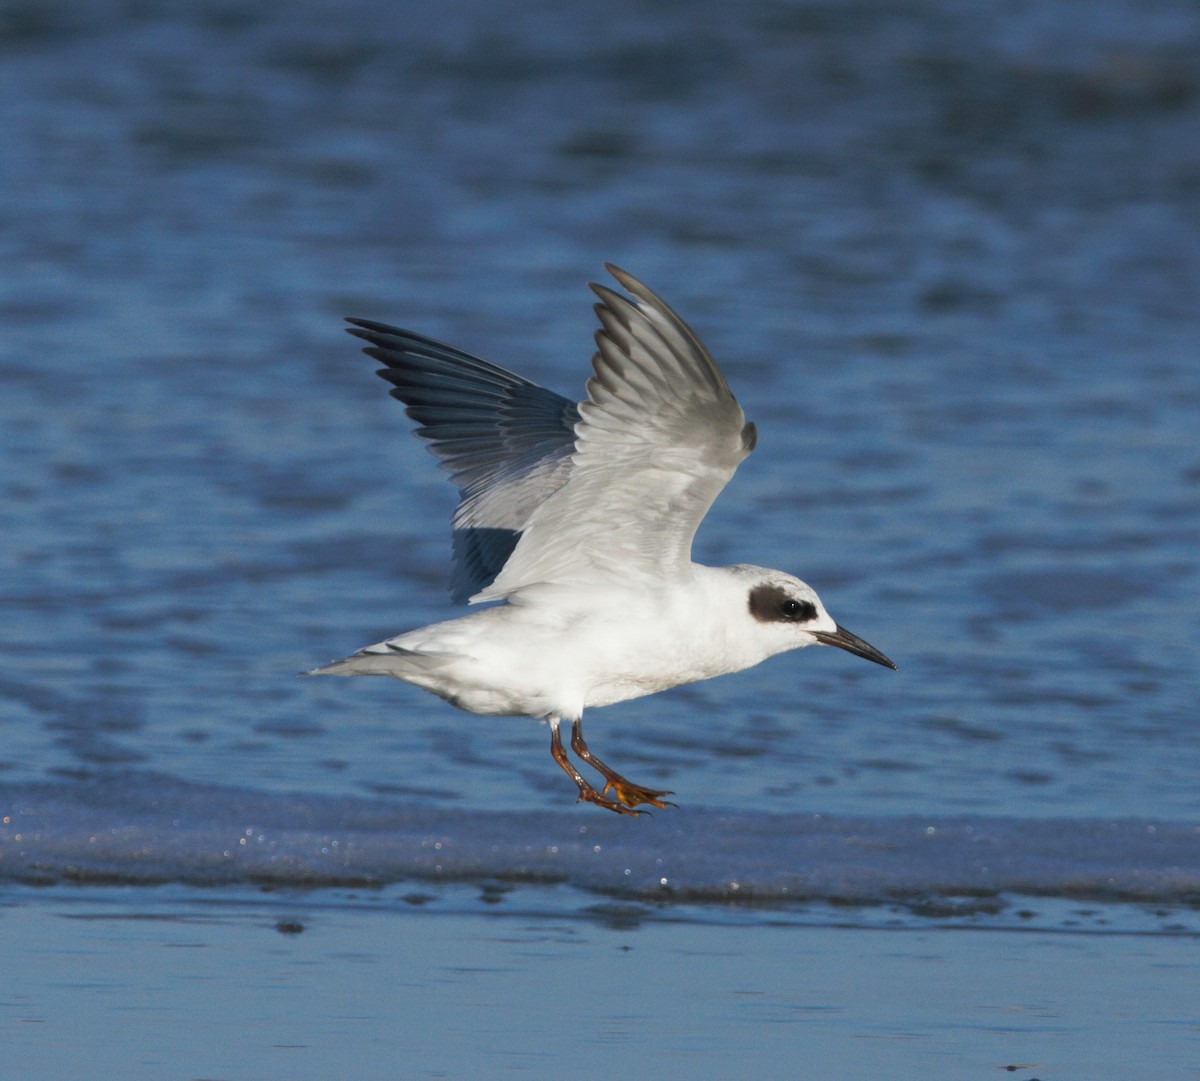 Snowy-crowned Tern - Christian Andretti